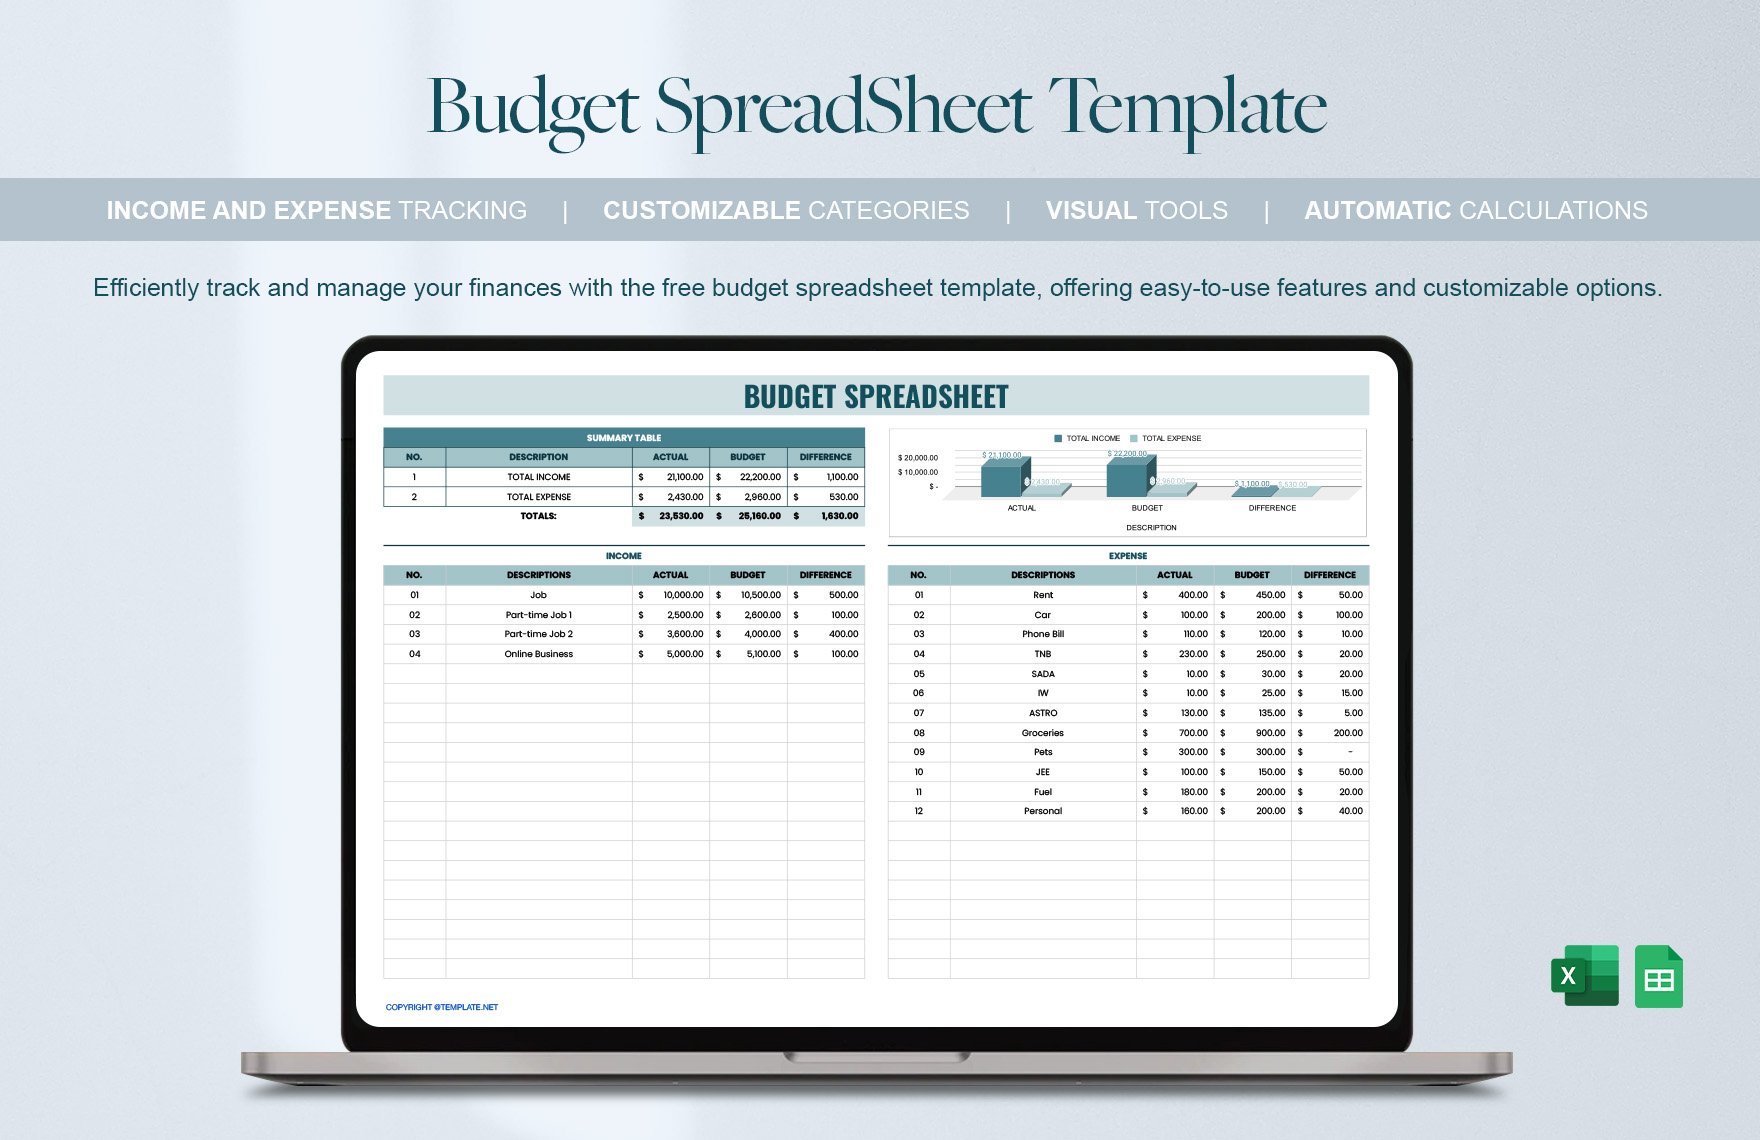 Free Budget SpreadSheet Template in Excel, Google Sheets